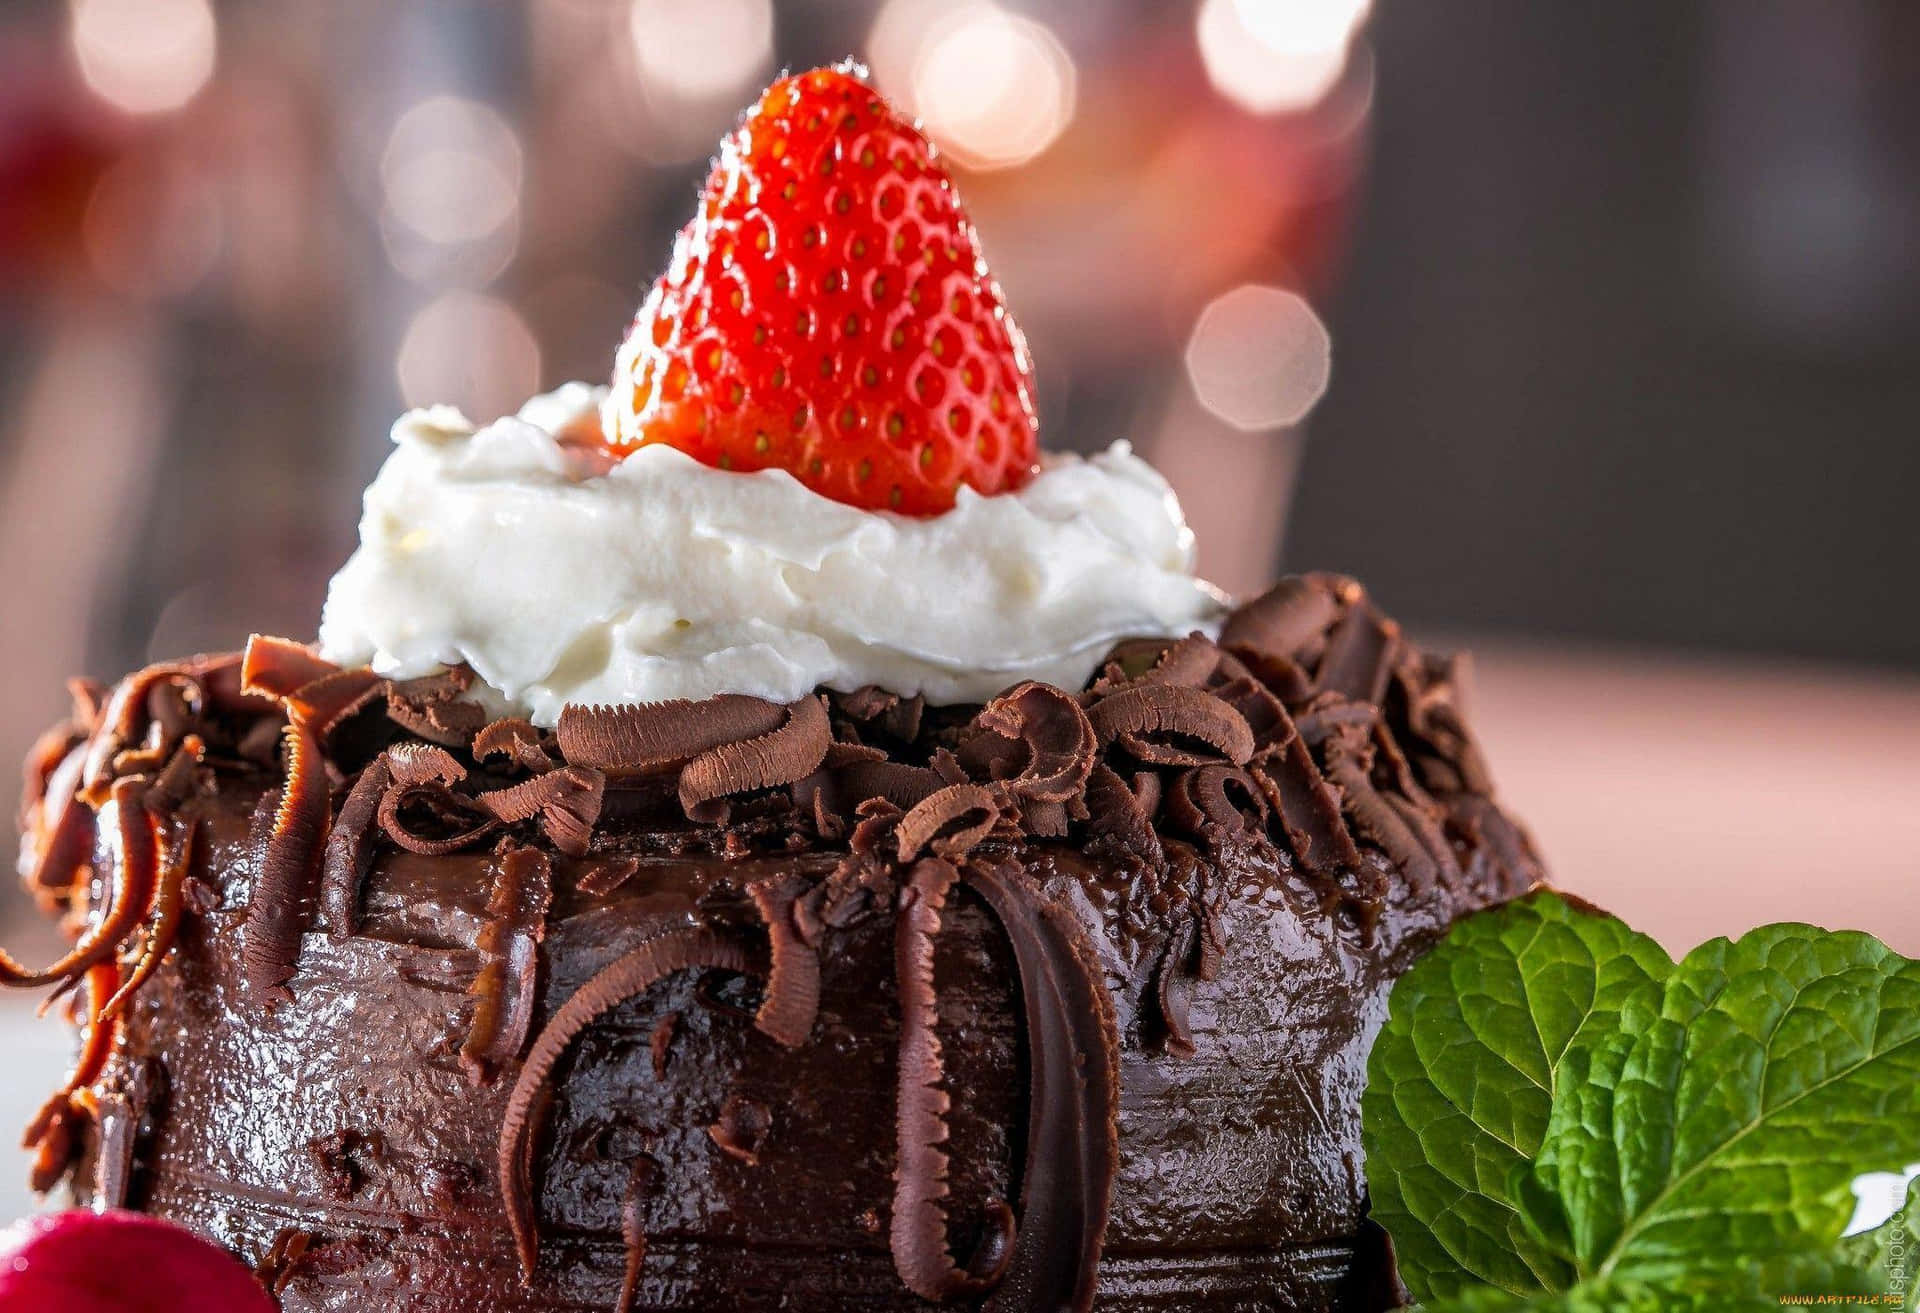 Delicious Chocolate Cake for Any Occasion